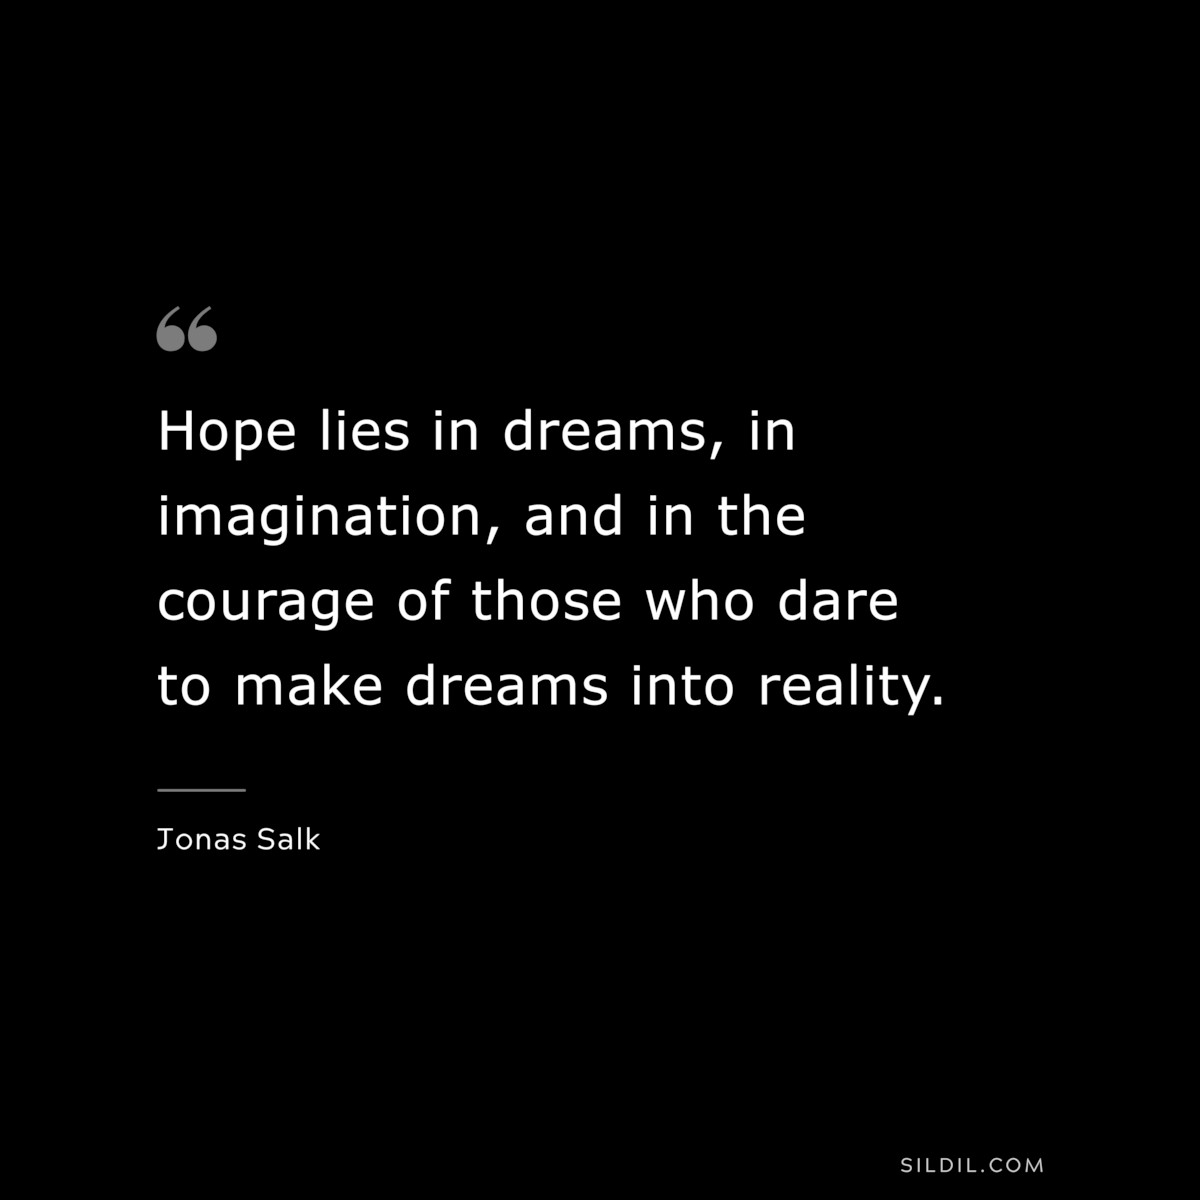 Hope lies in dreams, in imagination, and in the courage of those who dare to make dreams into reality. ― Jonas Salk